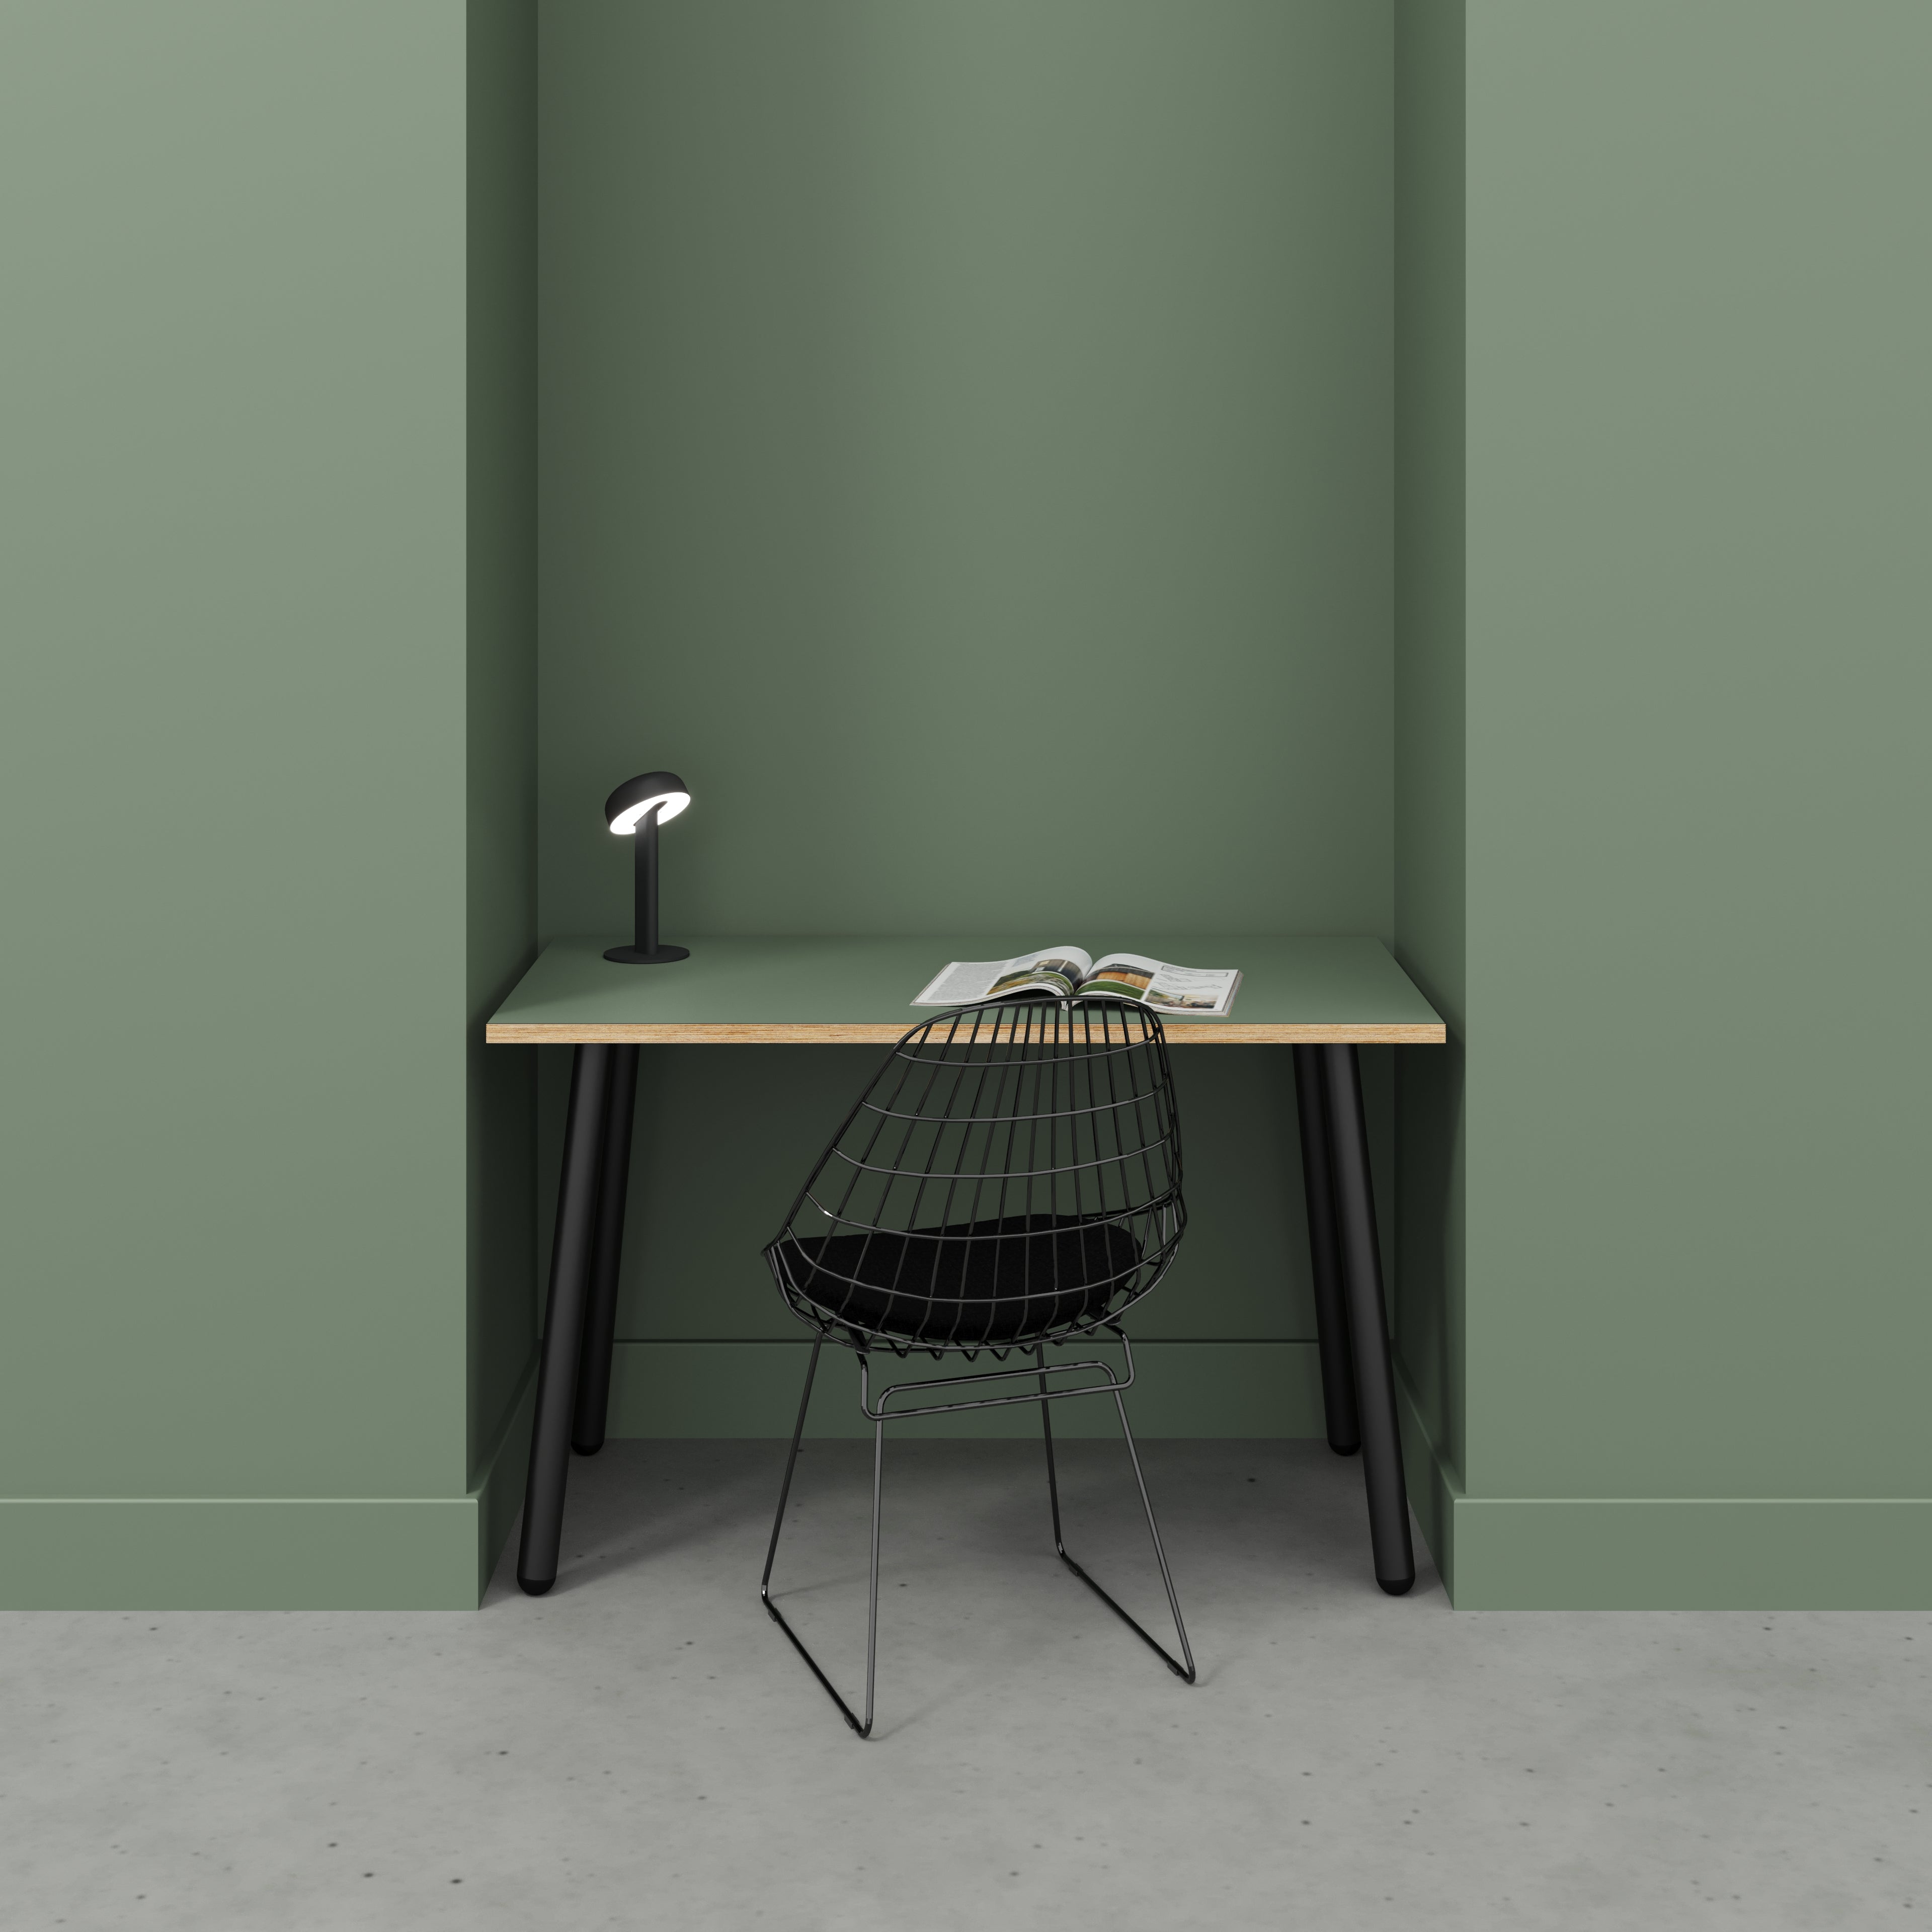 Desk with Black Round Single Pin Legs - Formica Green Slate - 1200(w) x 600(d) x 735(h)